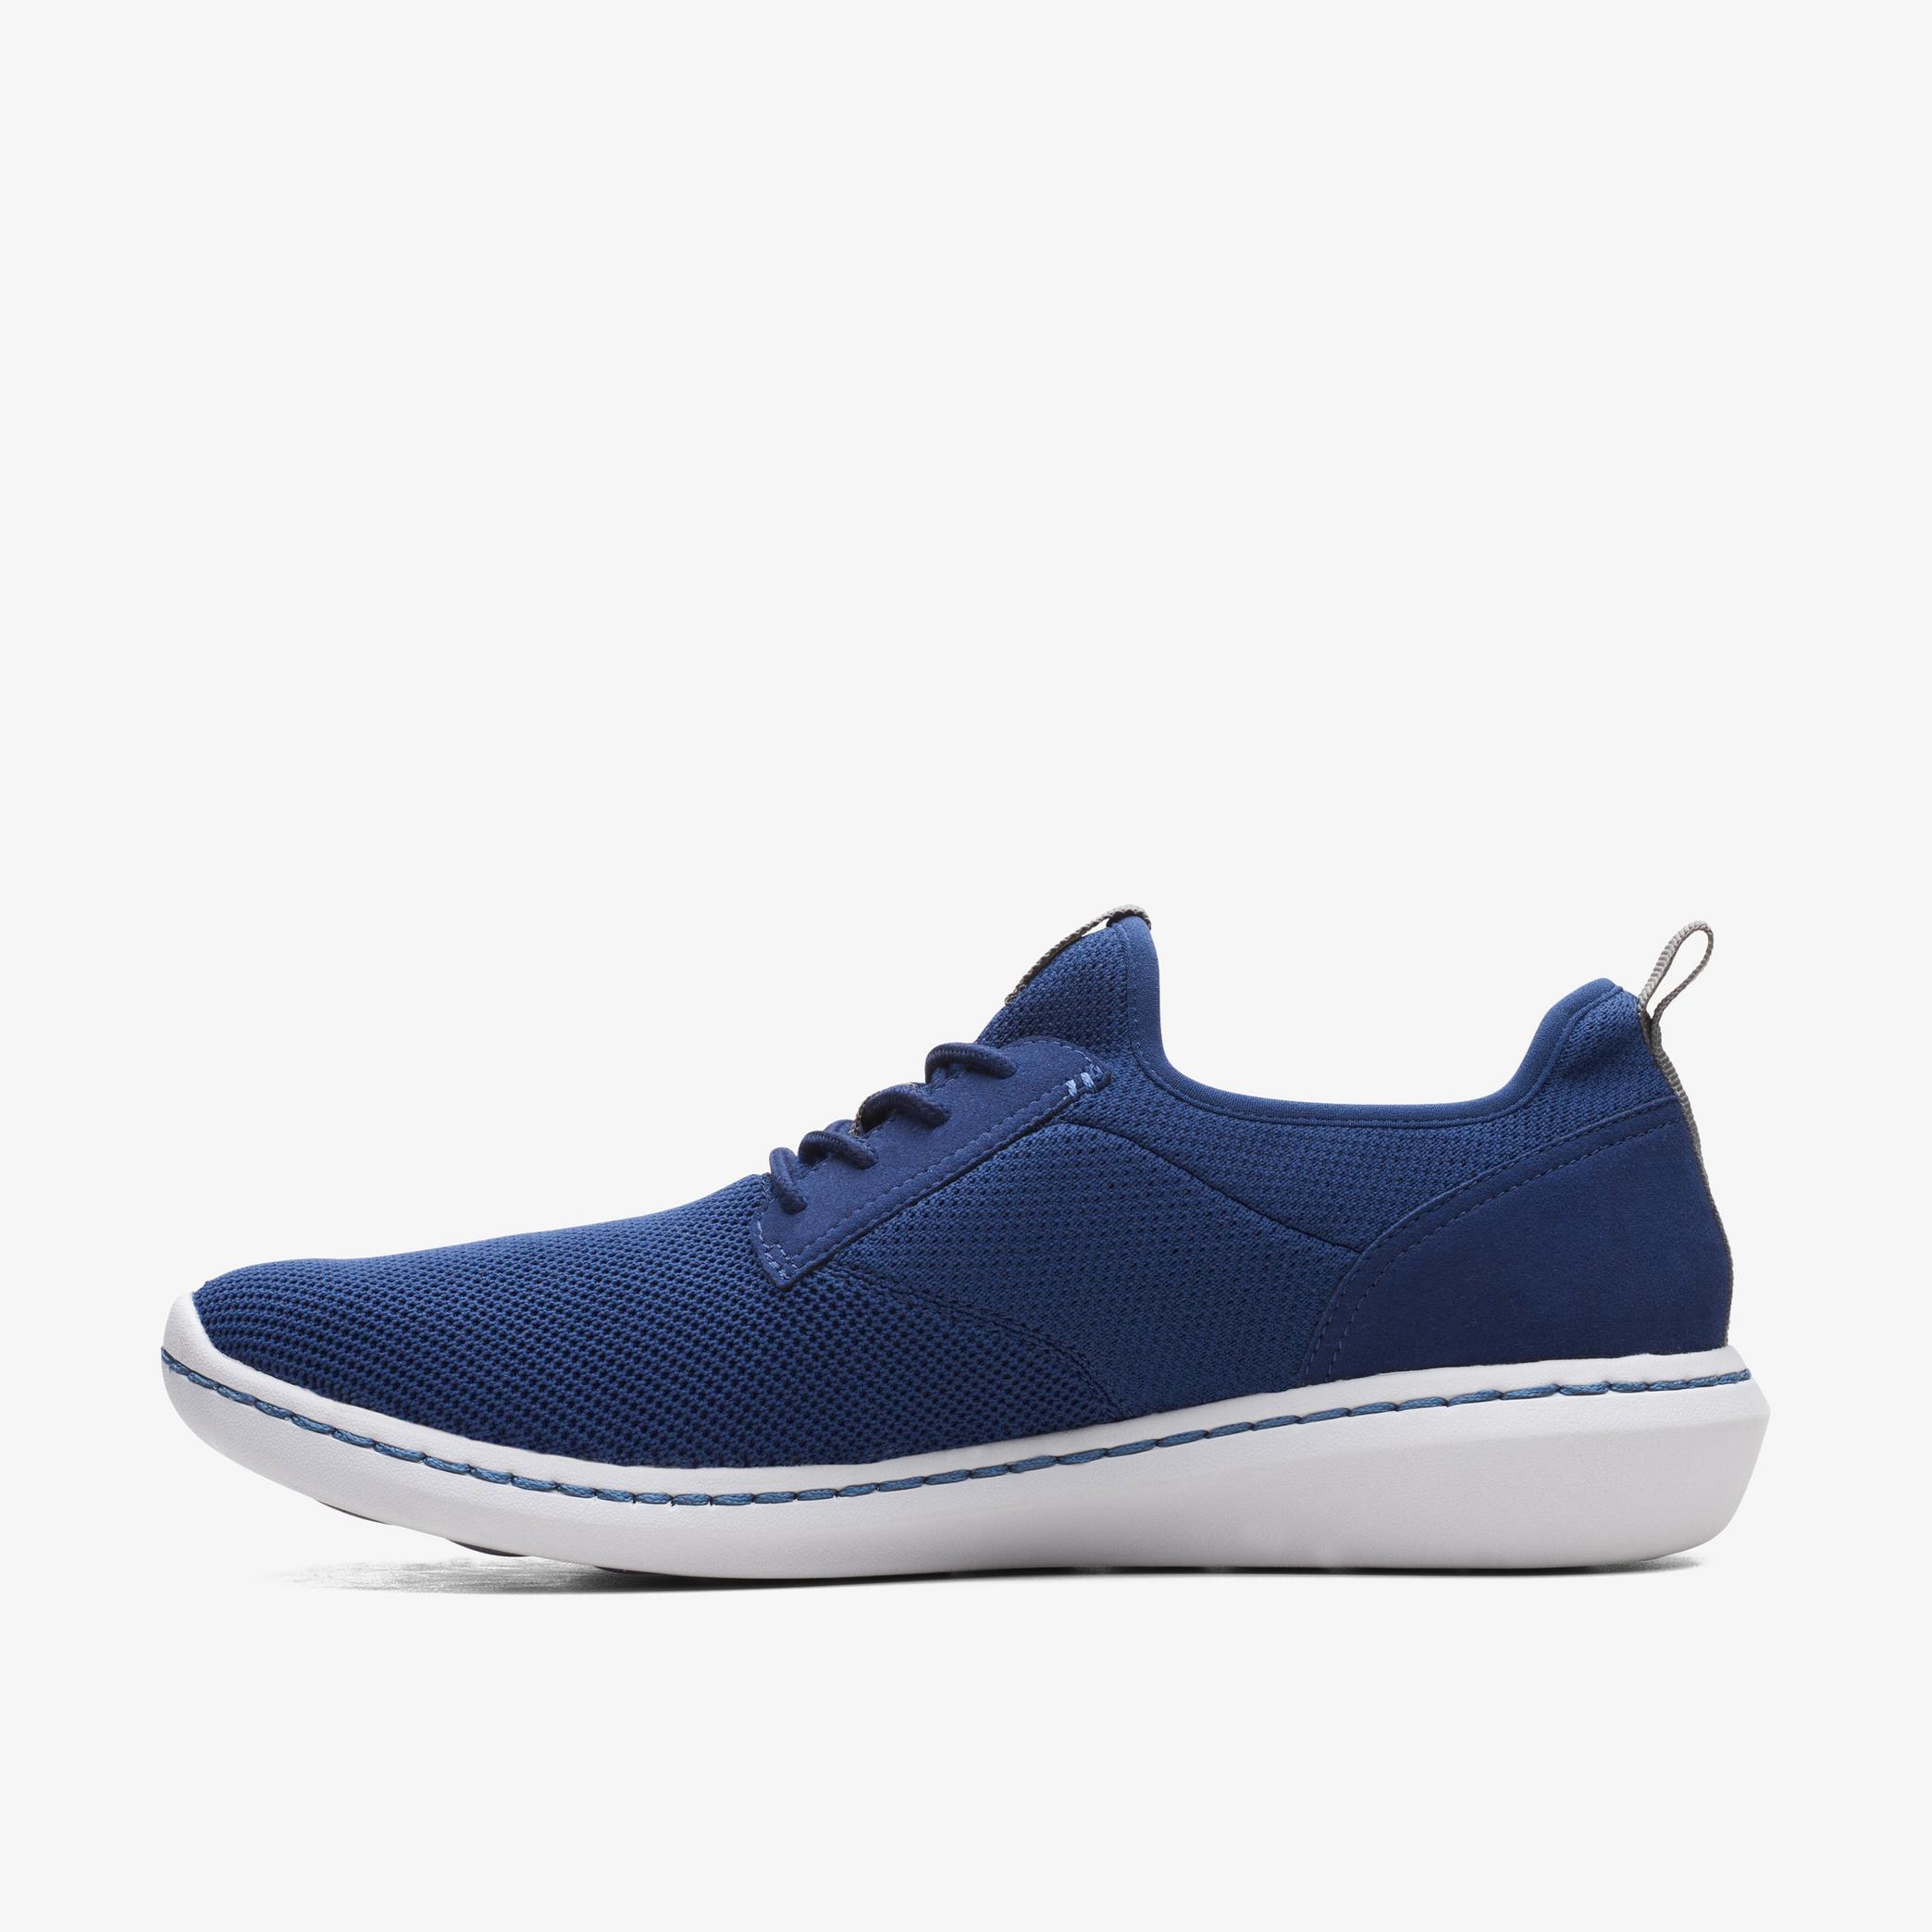 MENS Step Urban Low Navy Textile Shoes | Clarks Outlet